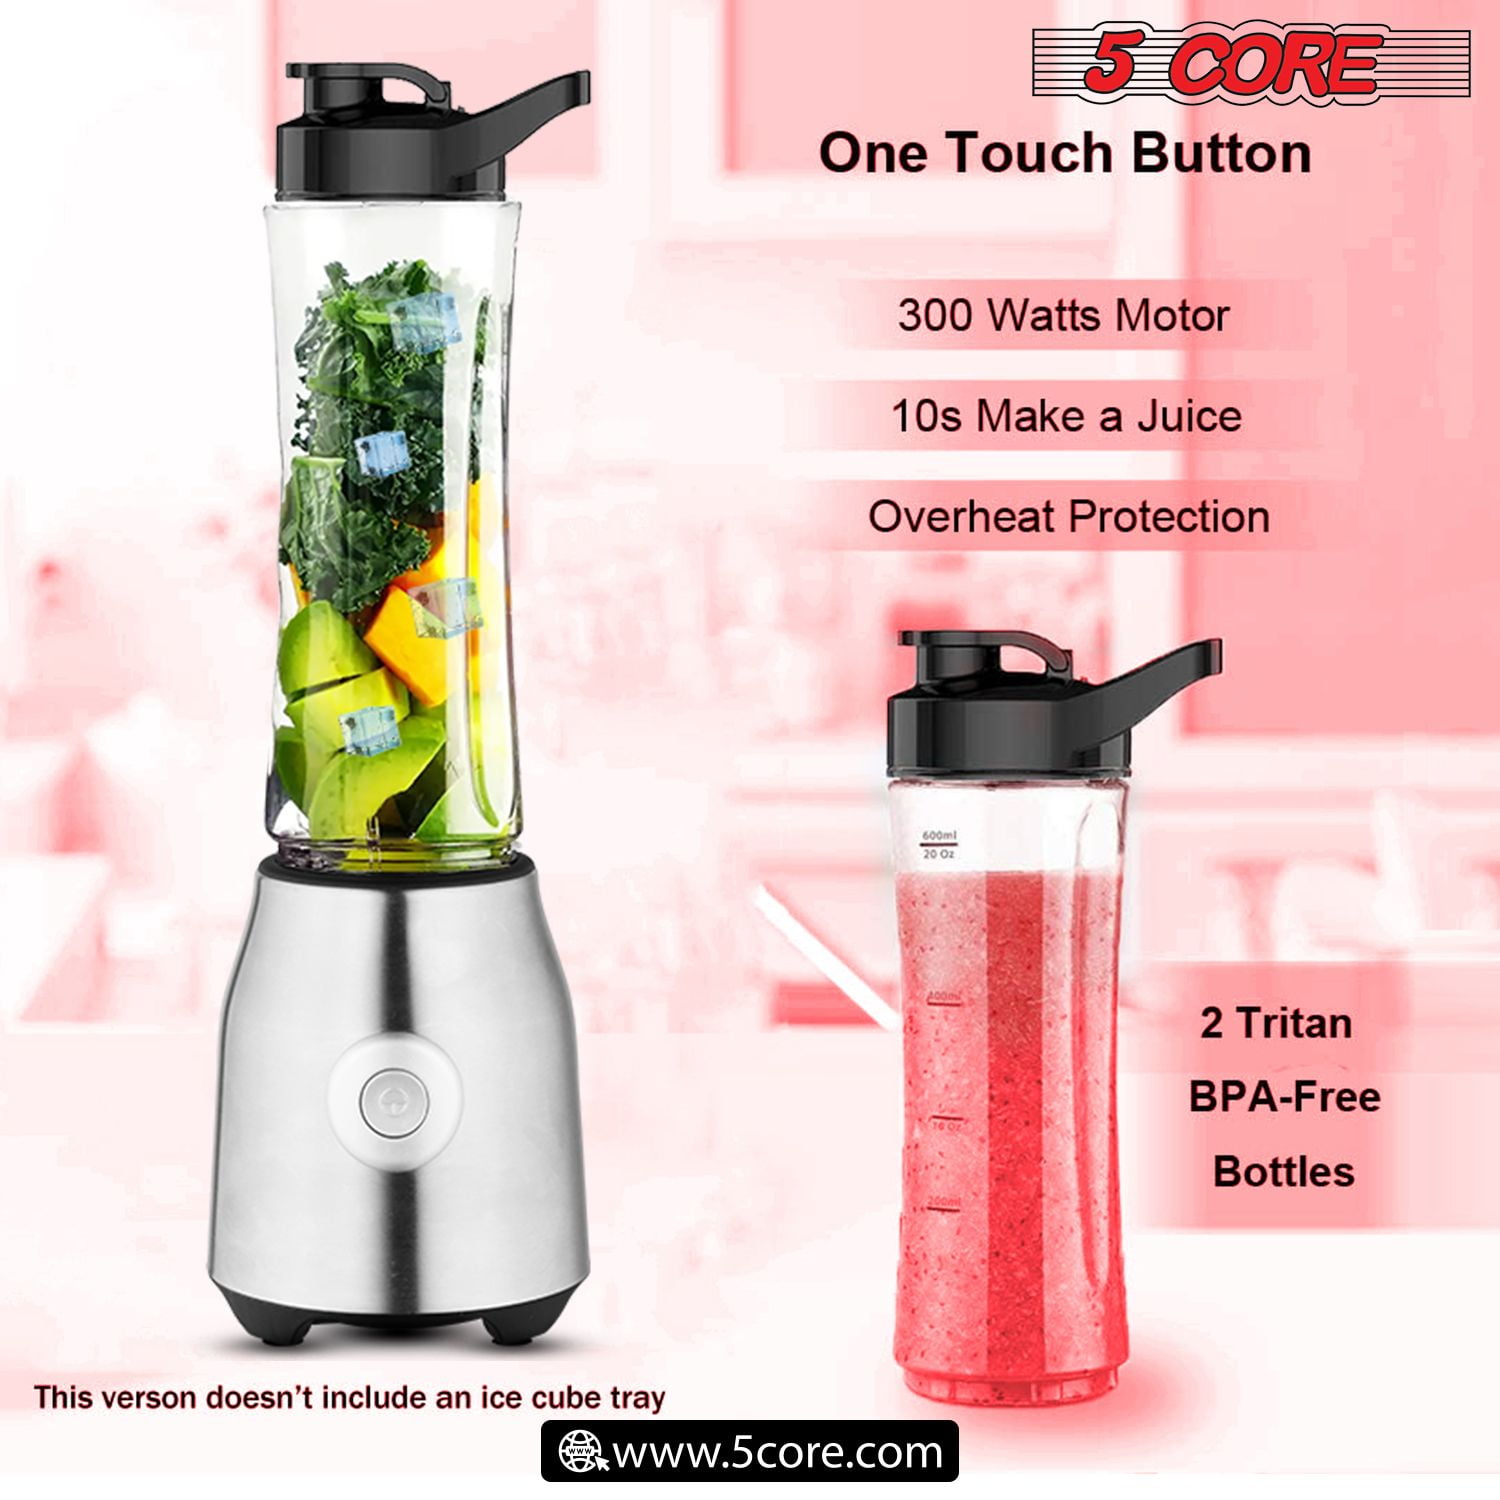 Dropship 5 Core Smoothie Blender Personal Blender For Shakes And Smoothies  300W Powerful Food Processor With 20oz Portable Sports Bottle Single Blend  Easy To Clean BPA Free - 5C 521 to Sell